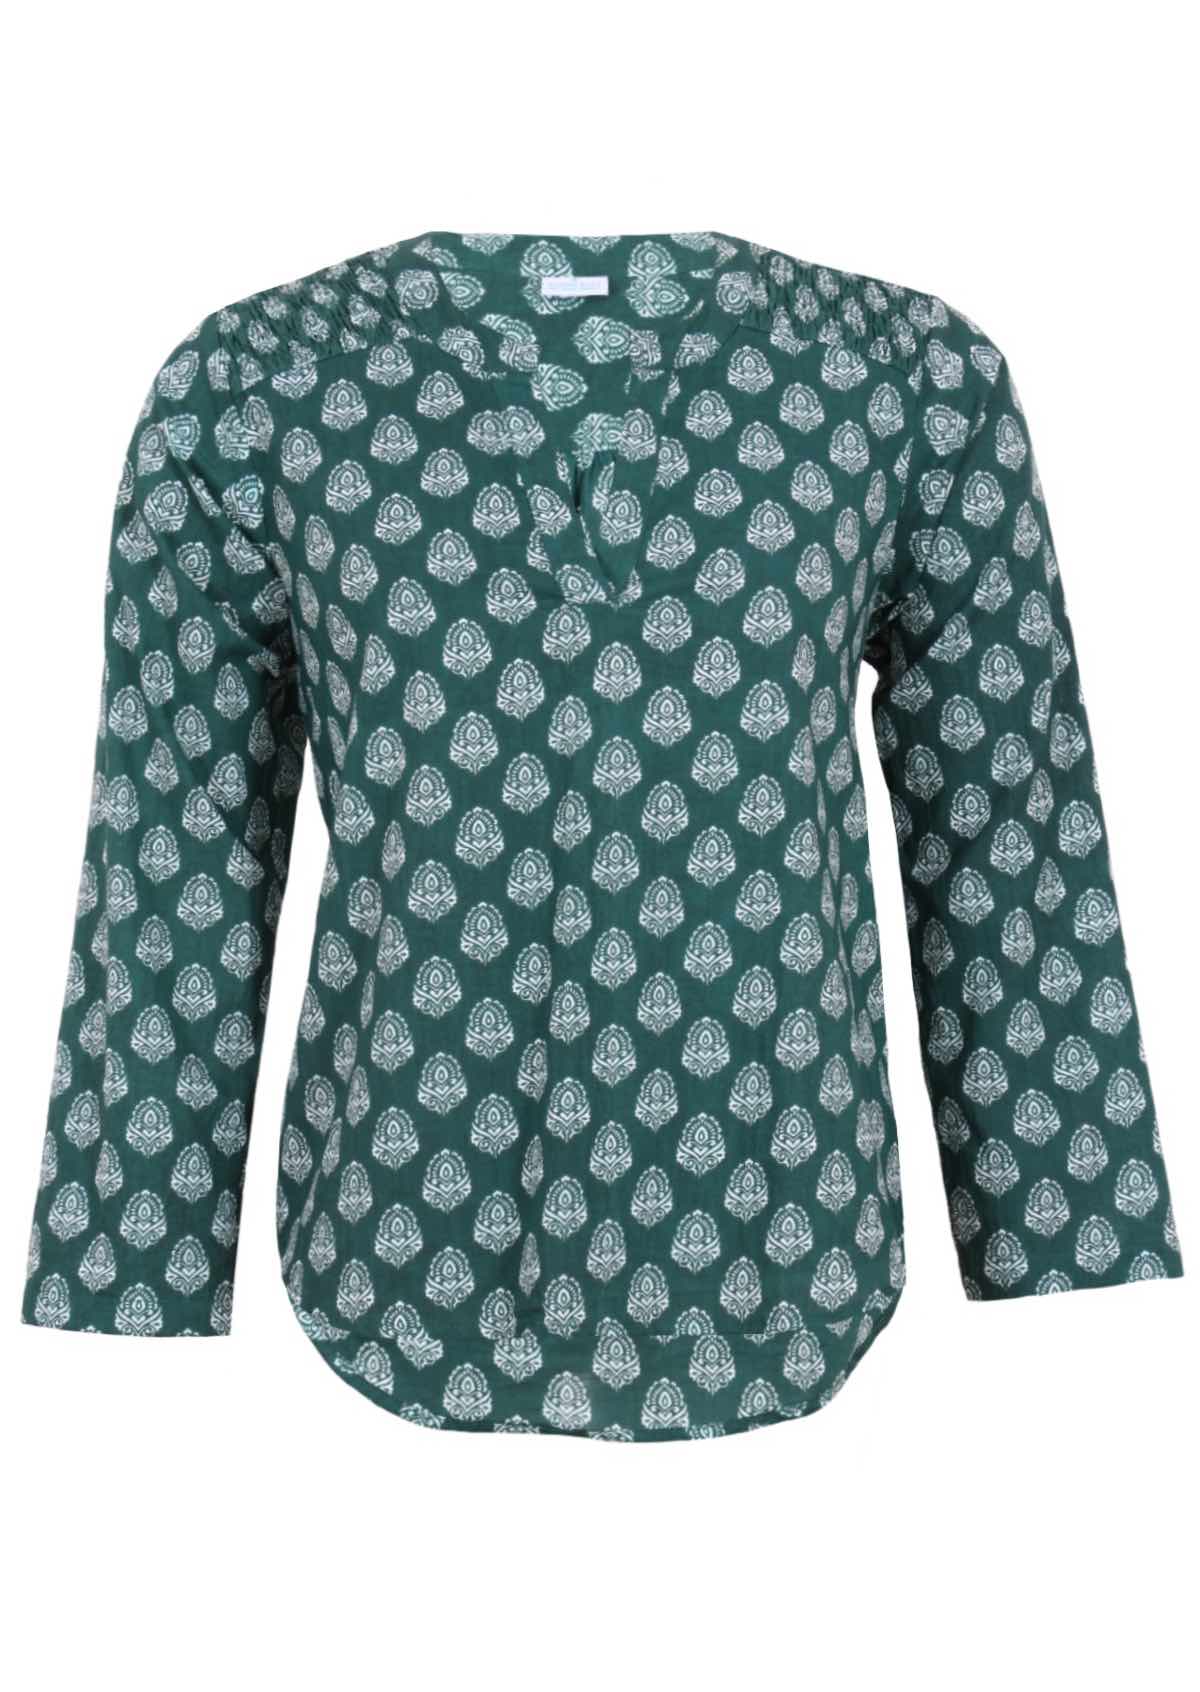 Lightweight cotton long sleeve top with pendant print on a dark green base